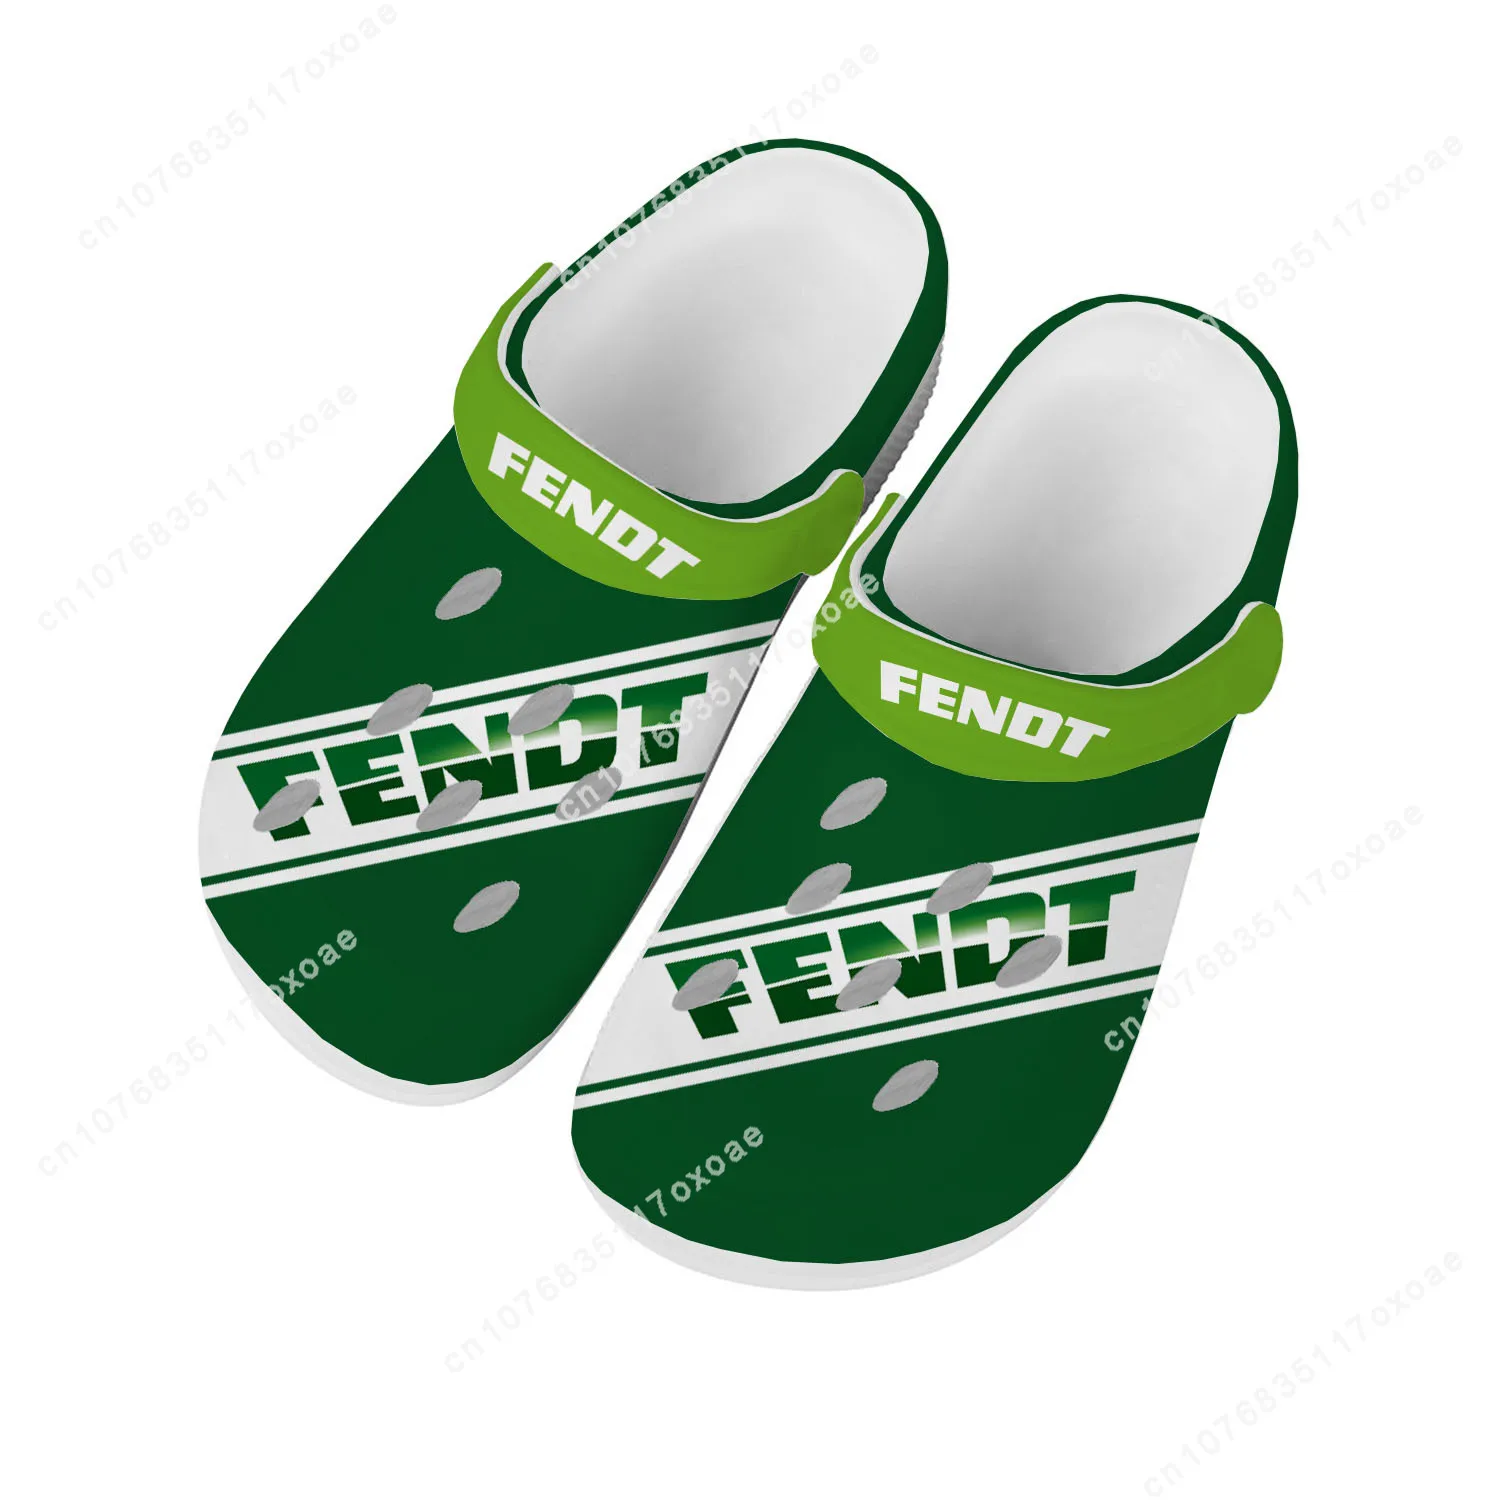 

Fendt shoes Home Clog Mens Women Youth Boy Girl Sandals Shoes Garden Custom Made Breathable Shoe Beach Hole Slippers